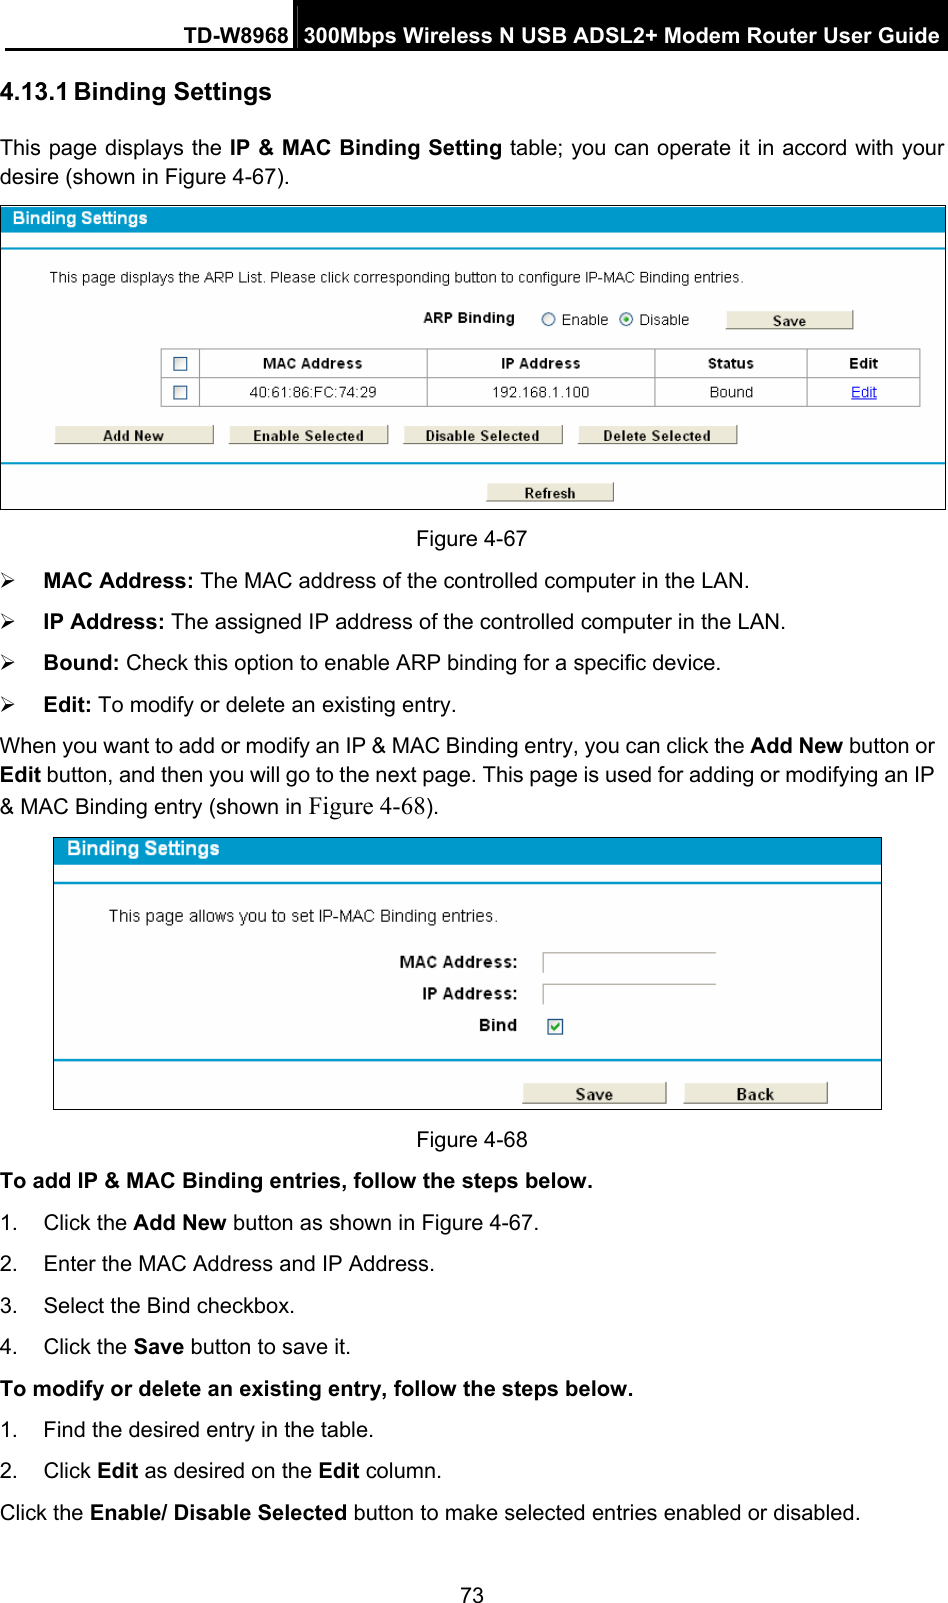 TD-W8968  300Mbps Wireless N USB ADSL2+ Modem Router User Guide 73 4.13.1 Binding Settings This page displays the IP &amp; MAC Binding Setting table; you can operate it in accord with your desire (shown in Figure 4-67).   Figure 4-67 ¾ MAC Address: The MAC address of the controlled computer in the LAN.   ¾ IP Address: The assigned IP address of the controlled computer in the LAN.   ¾ Bound: Check this option to enable ARP binding for a specific device.   ¾ Edit: To modify or delete an existing entry.   When you want to add or modify an IP &amp; MAC Binding entry, you can click the Add New button or Edit button, and then you will go to the next page. This page is used for adding or modifying an IP &amp; MAC Binding entry (shown in Figure 4-68).    Figure 4-68   To add IP &amp; MAC Binding entries, follow the steps below. 1. Click the Add New button as shown in Figure 4-67.  2.  Enter the MAC Address and IP Address. 3.  Select the Bind checkbox.   4. Click the Save button to save it. To modify or delete an existing entry, follow the steps below. 1.  Find the desired entry in the table.   2. Click Edit as desired on the Edit column.   Click the Enable/ Disable Selected button to make selected entries enabled or disabled. 